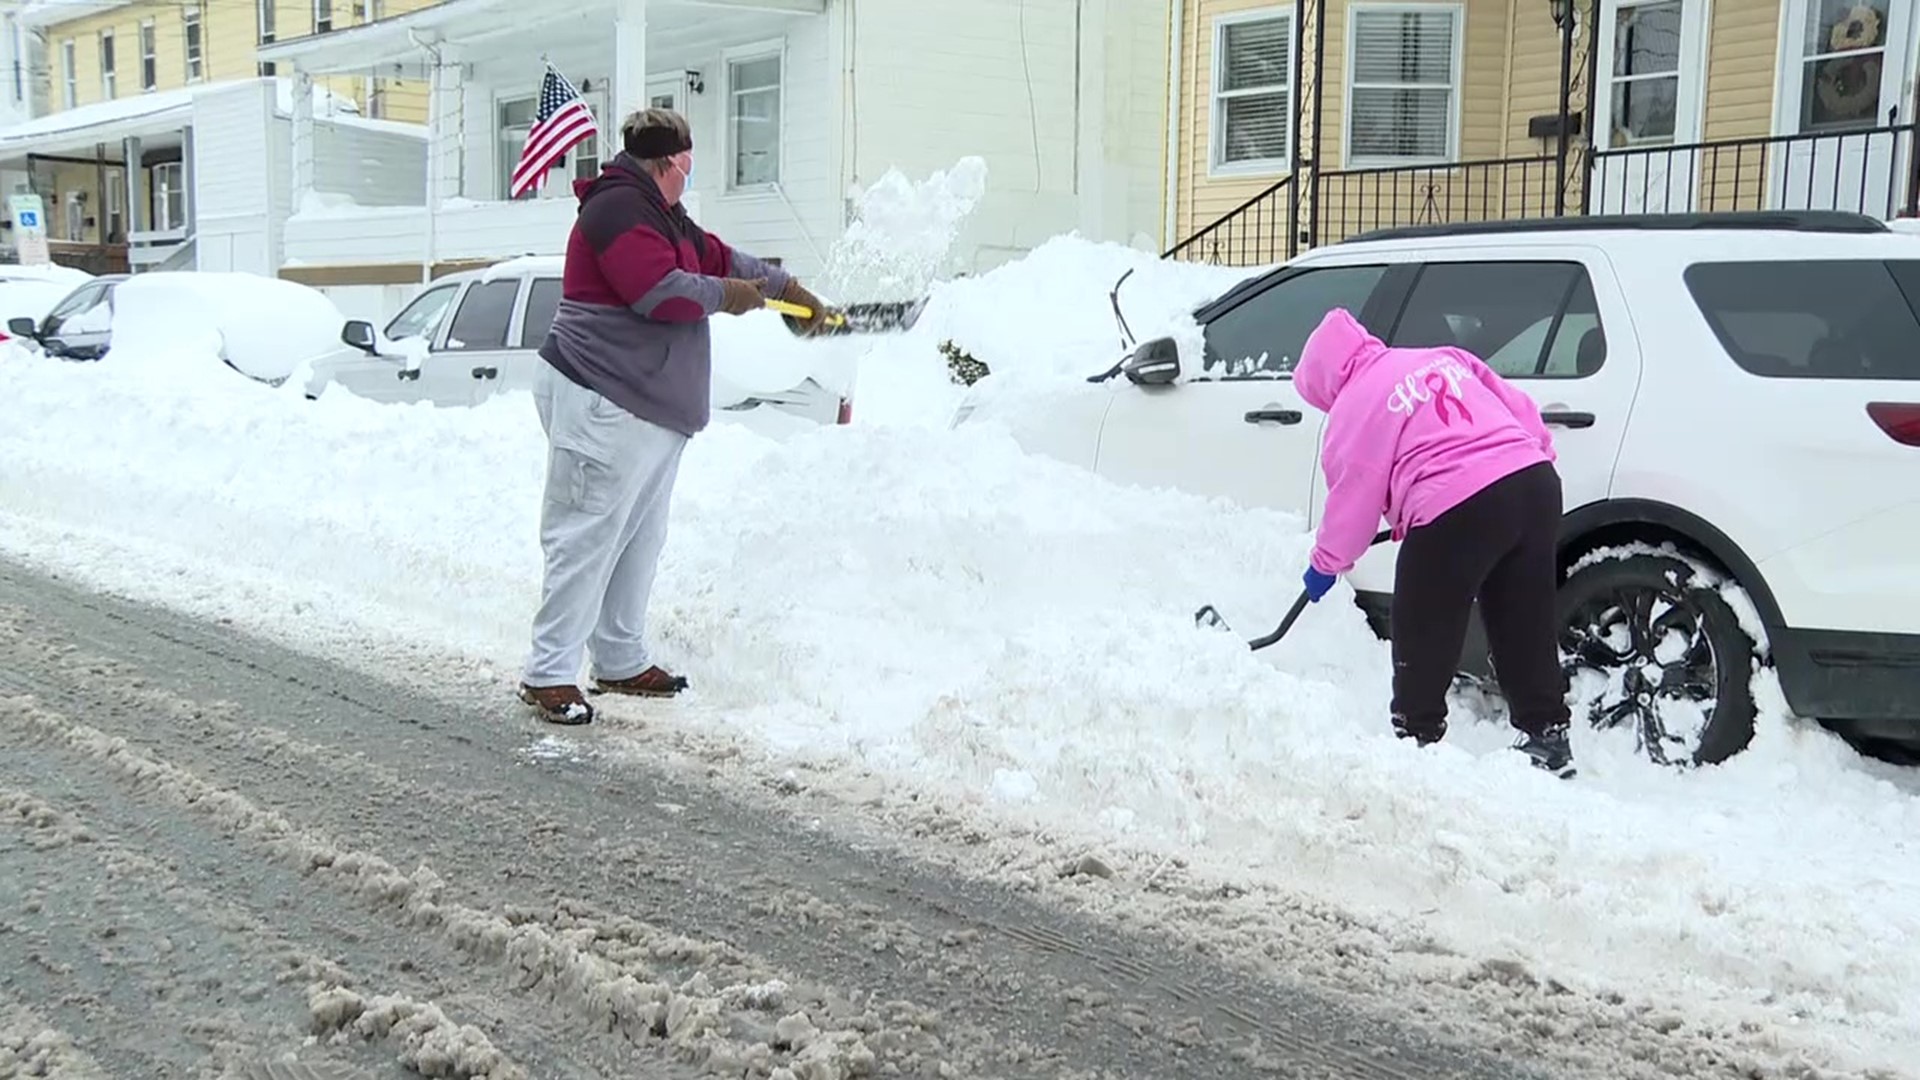 Folks who live on West Bertsch Street continue to dig themselves out.